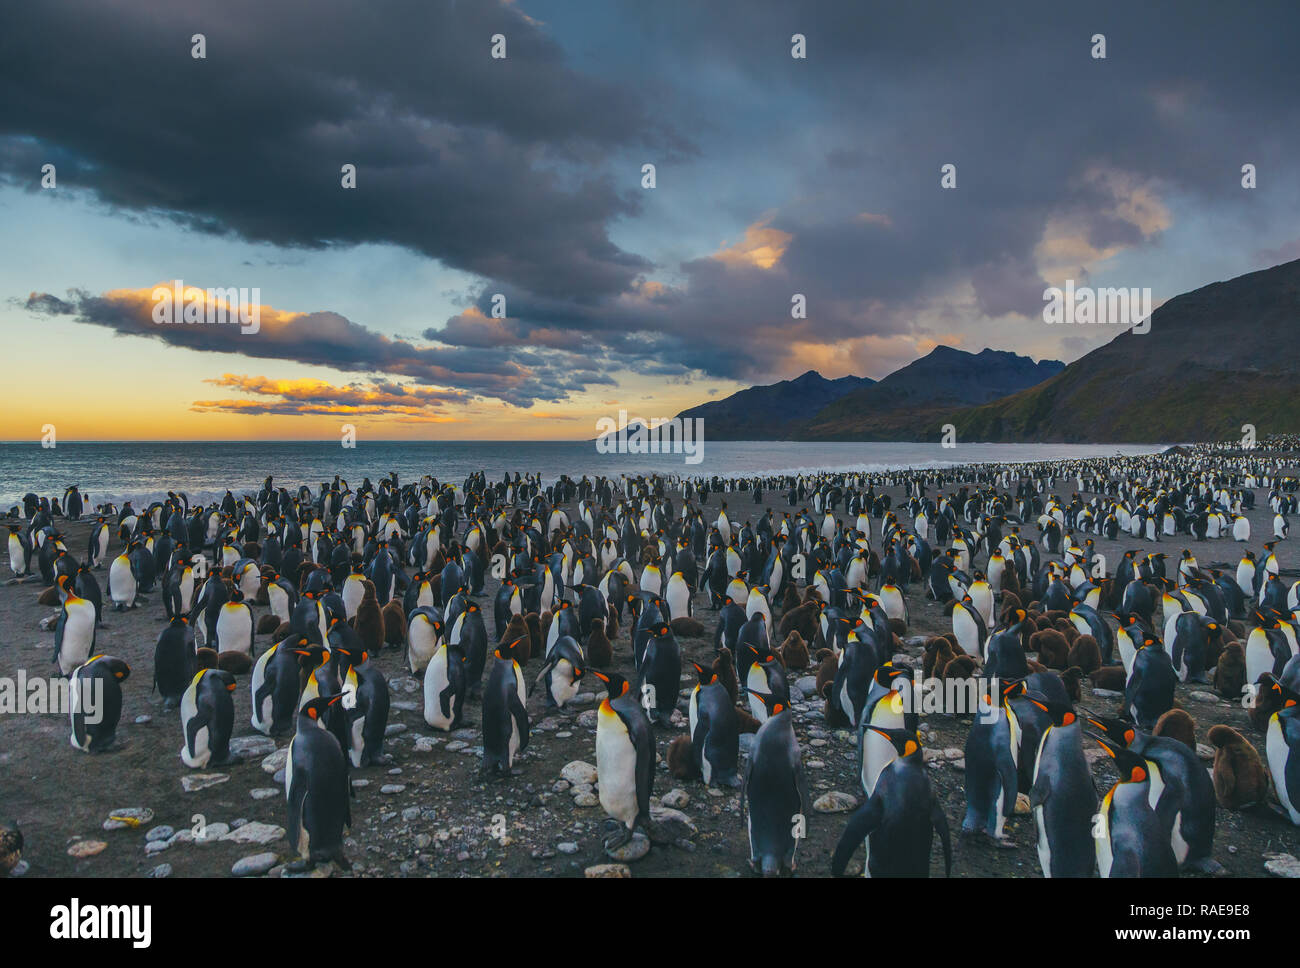 A fantastic sunset over St Andrews Bay in South Georgia. / THOUSANDS of King penguins have been captured dominating one of Britain’s most far-flung an Stock Photo